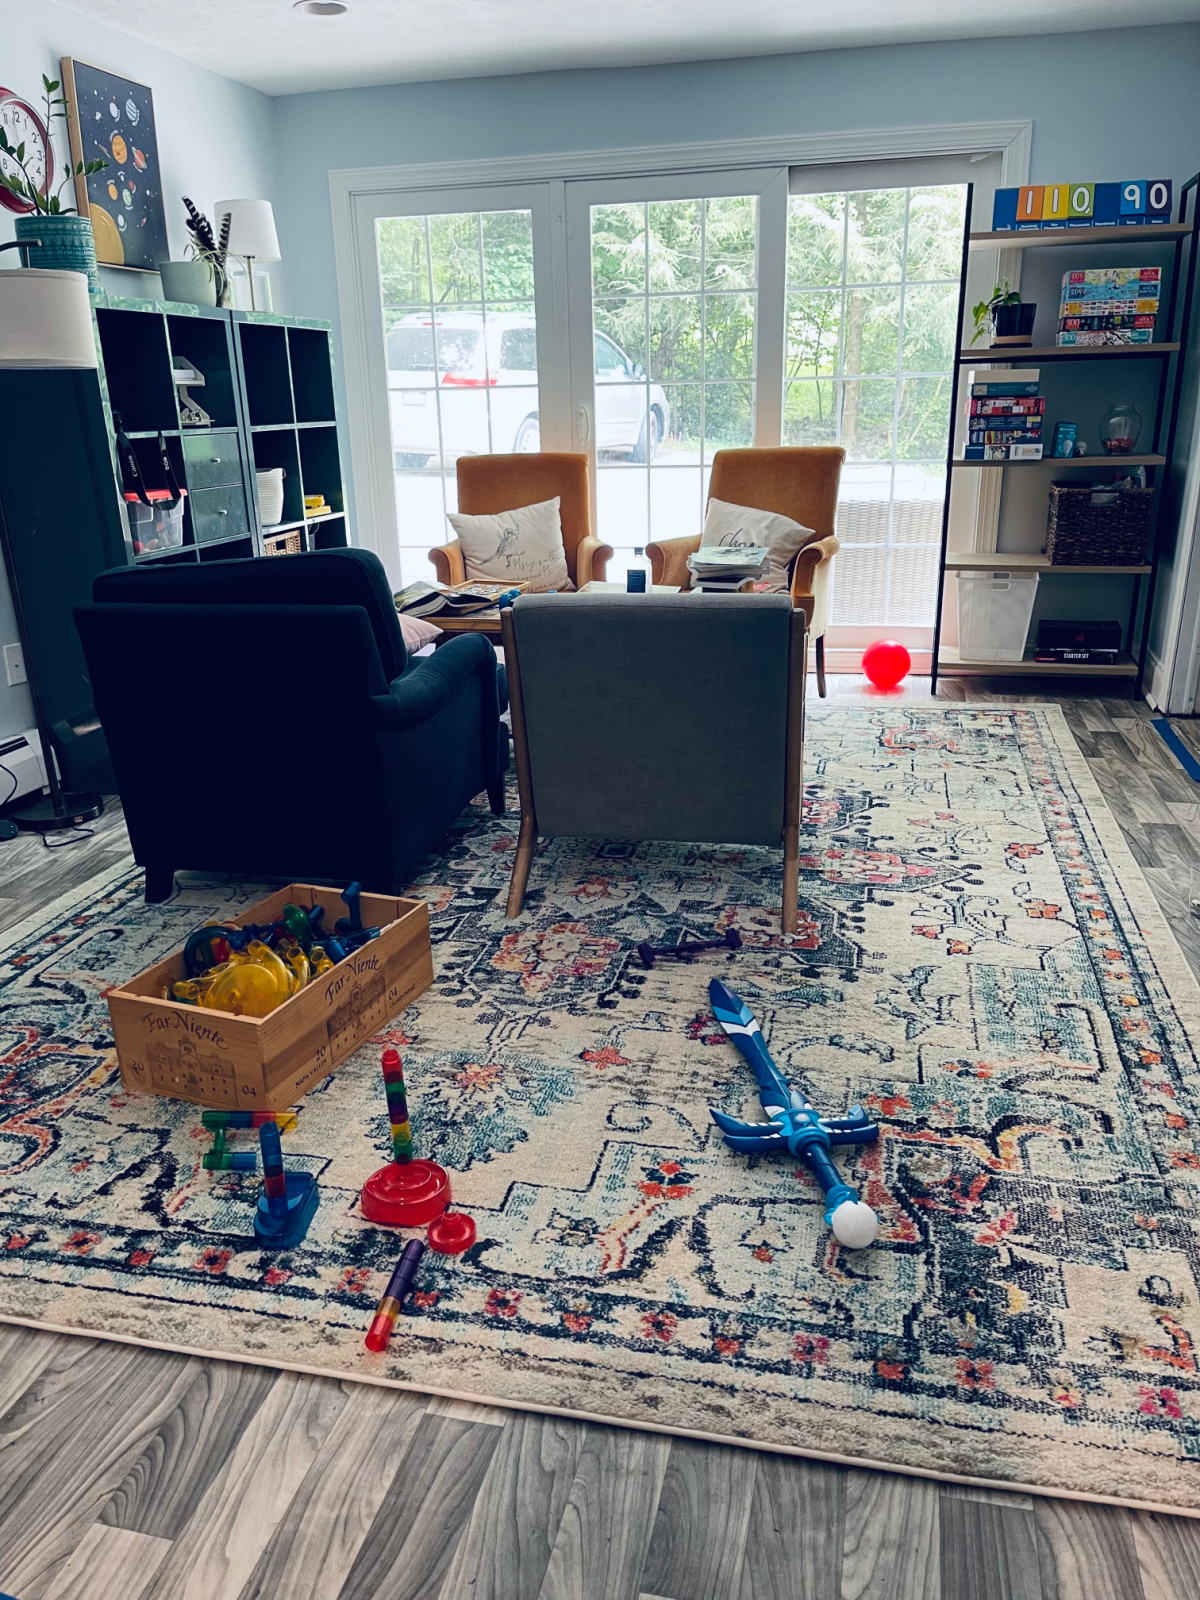 homeschool room with toys, comfy chairs and Safaveih rug - NOT a ruggable rug.